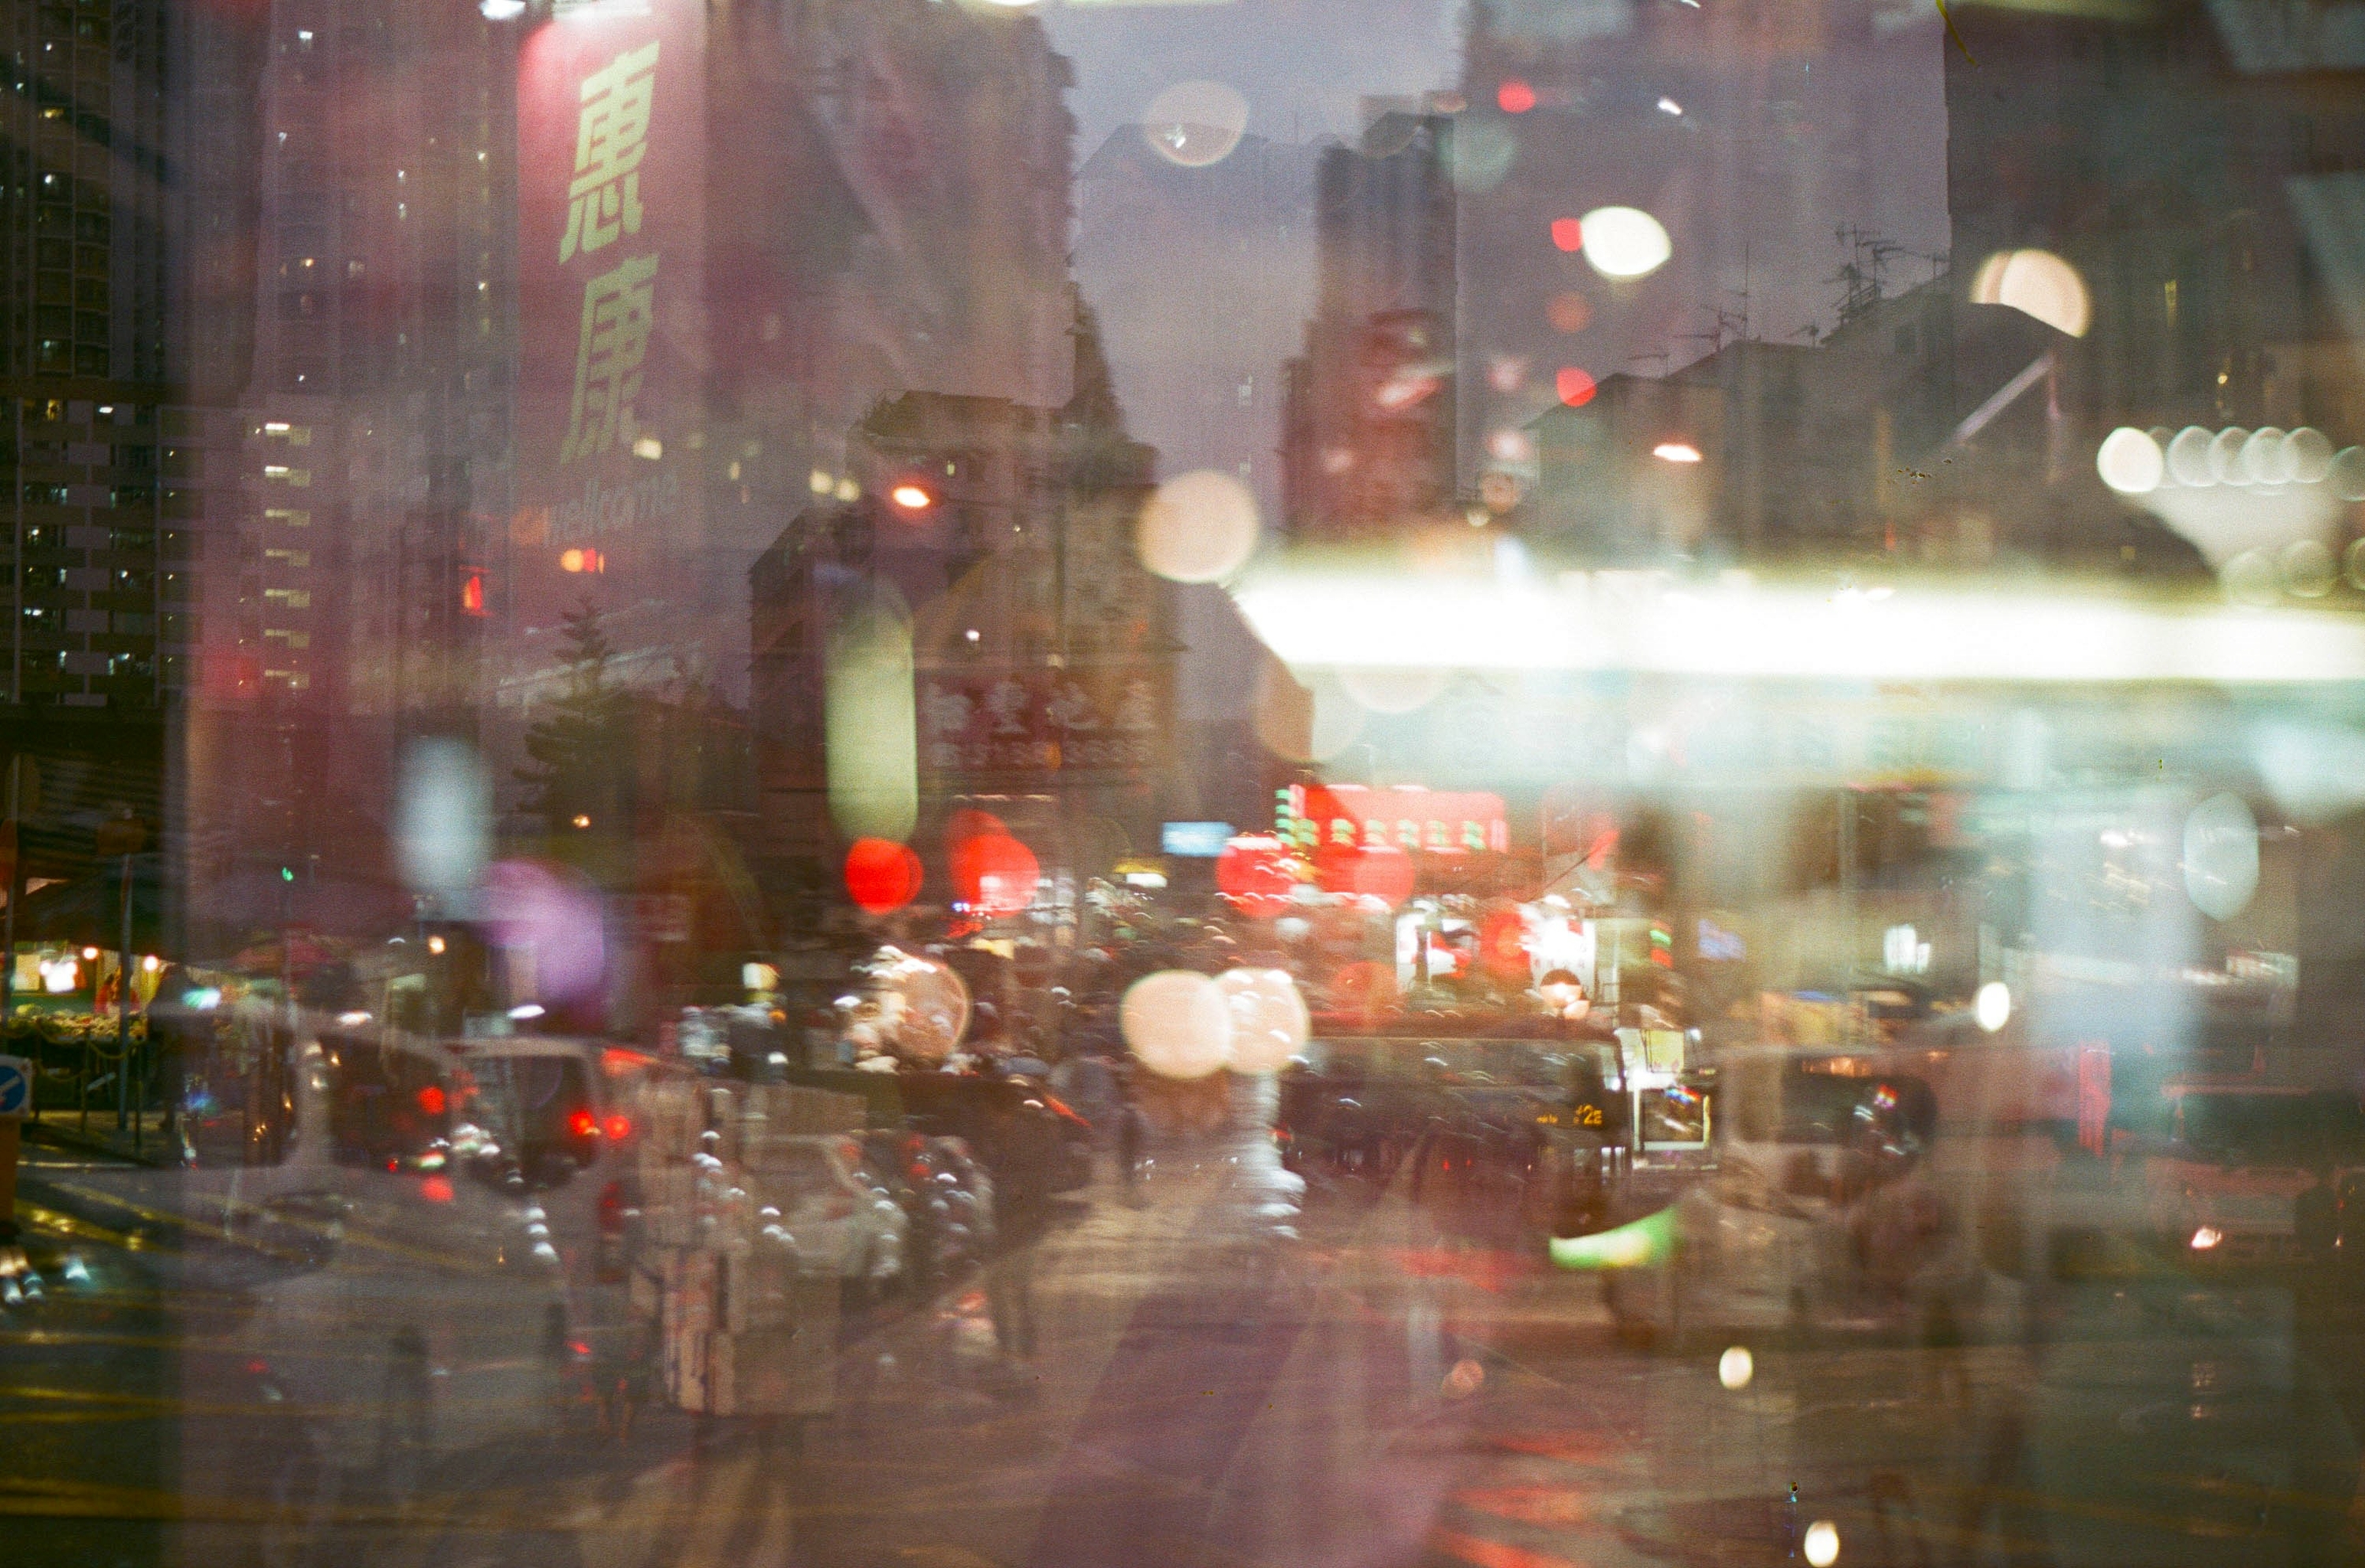 A street scene in Hong Kong with red lanterns, tall buildings in the background, dim lighting and blurred double exposure.